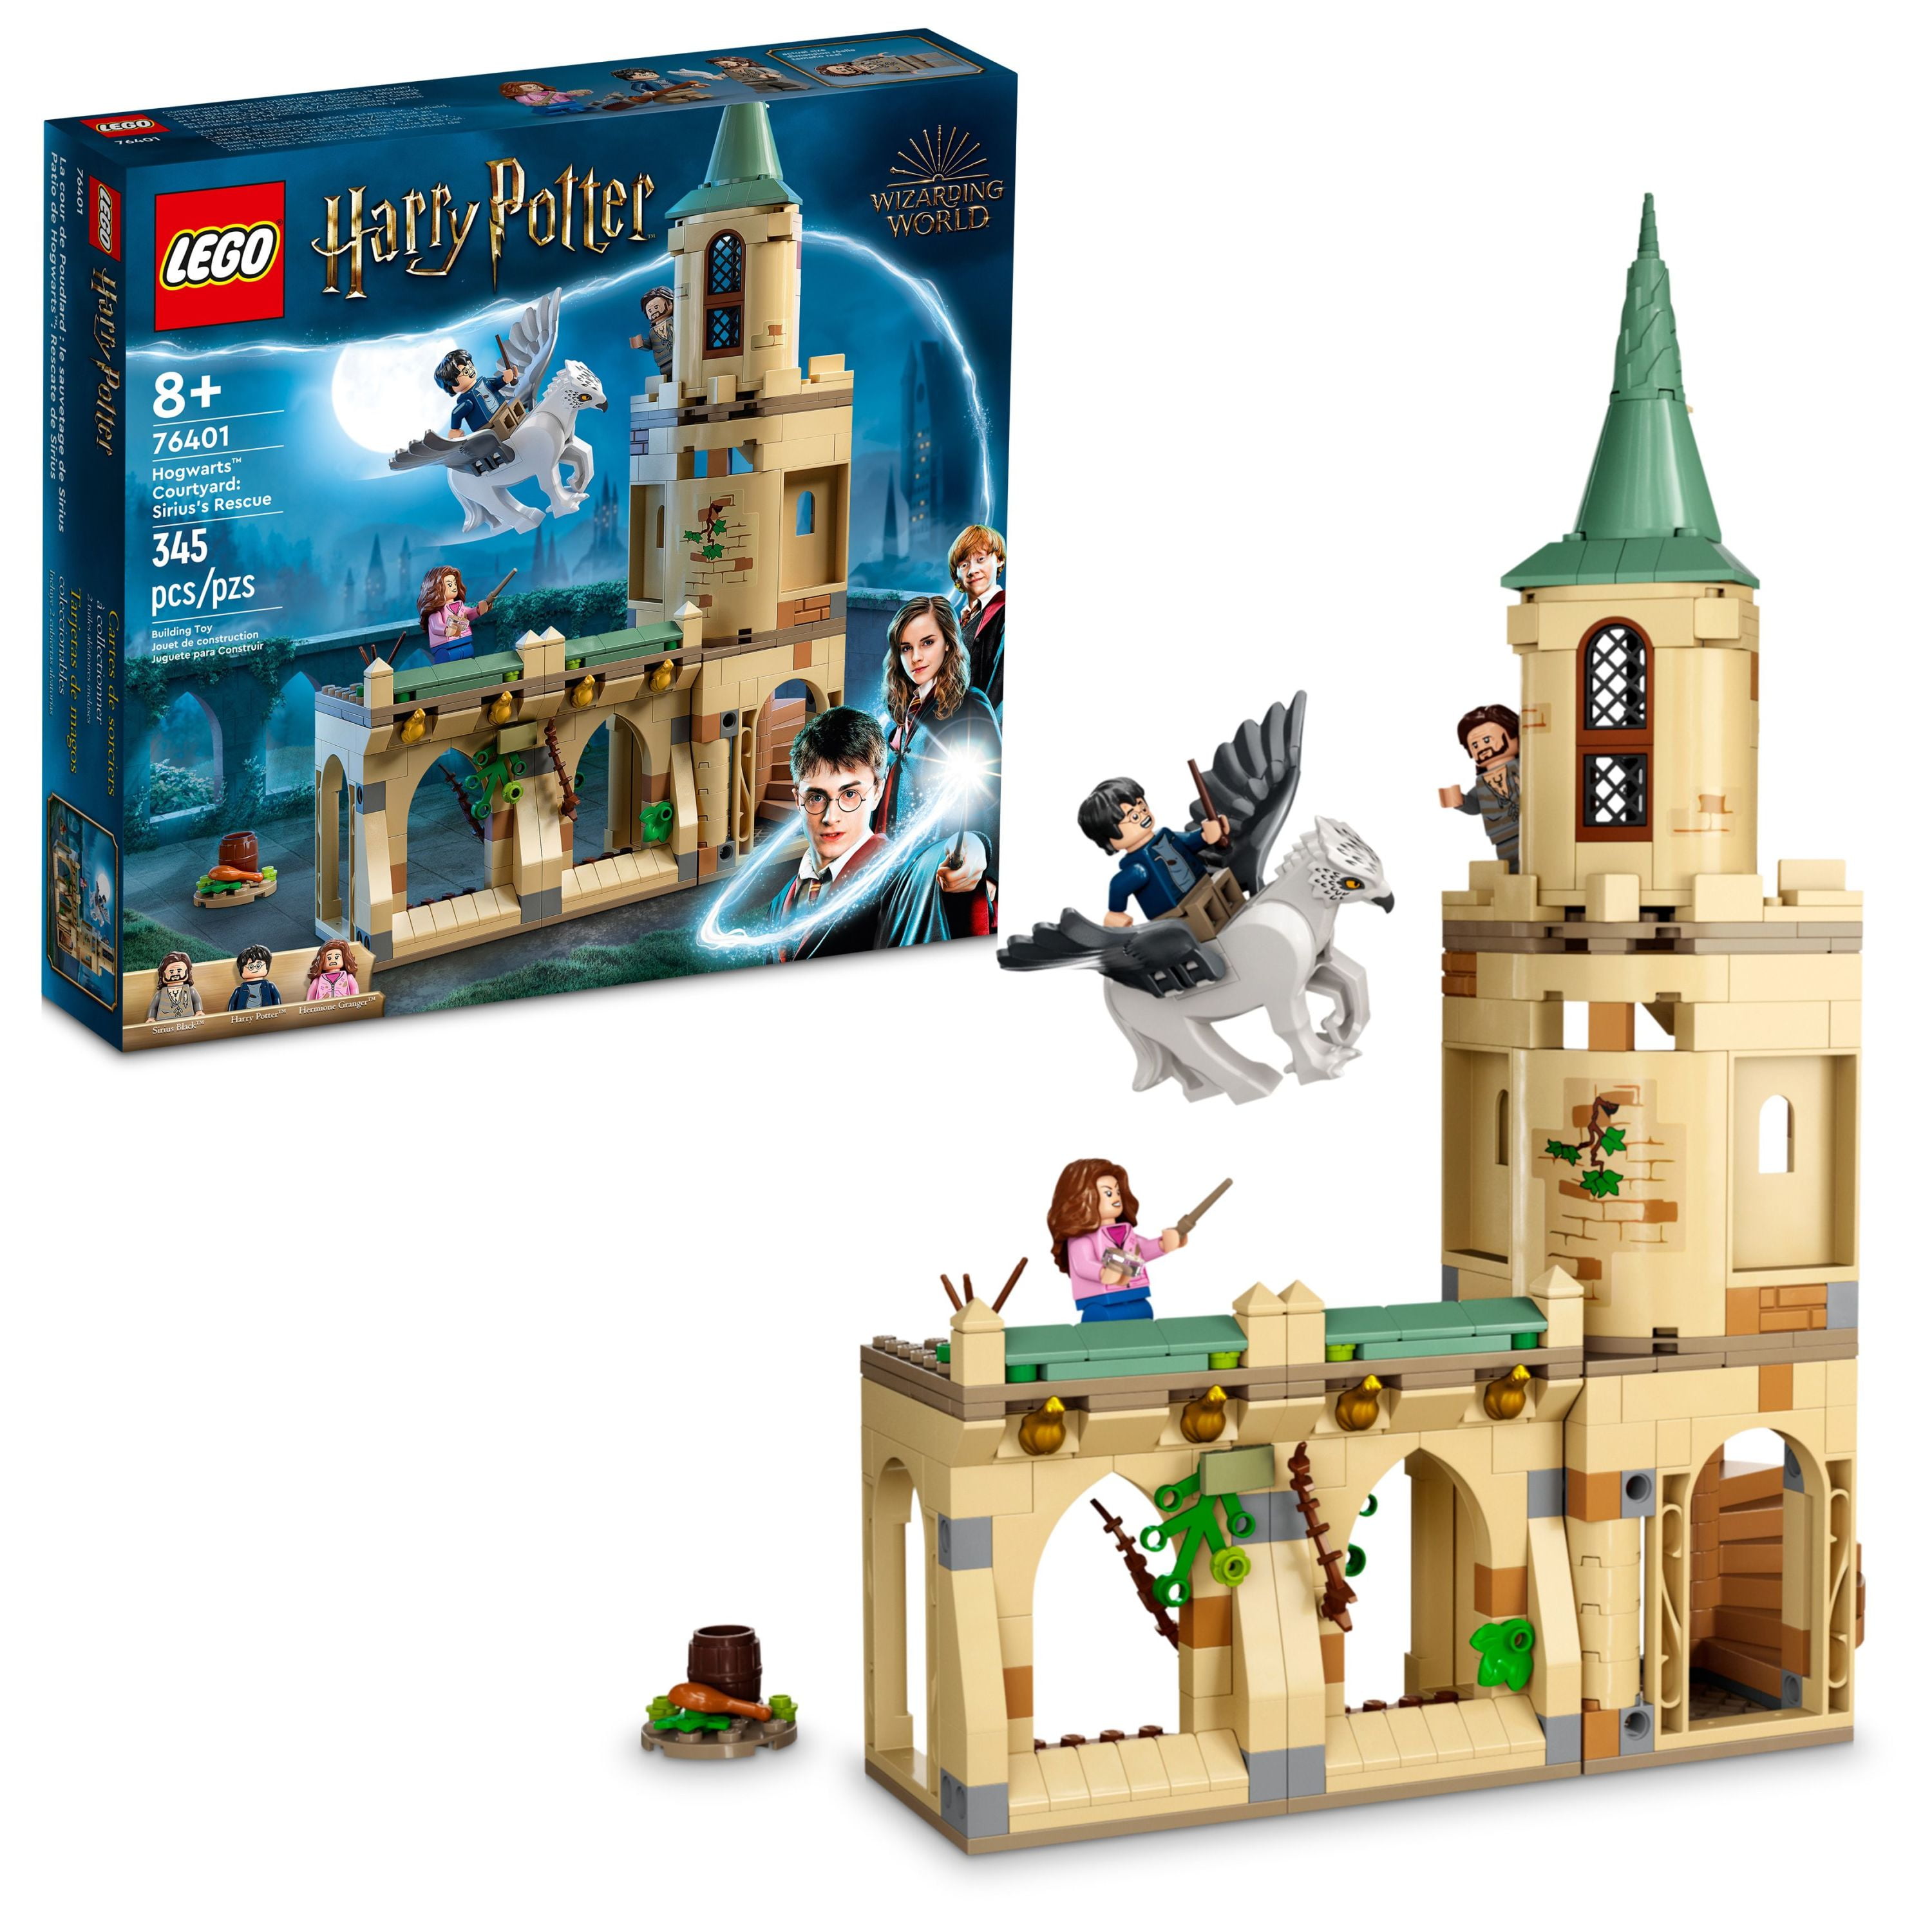 blive forkølet Bug Forlænge LEGO Harry Potter Hogwarts Courtyard: Sirius's Rescue 76401 Castle Tower  Toy, Collectible Set with Buckbeak Hippogriff Figure and Prison Cell -  Walmart.com